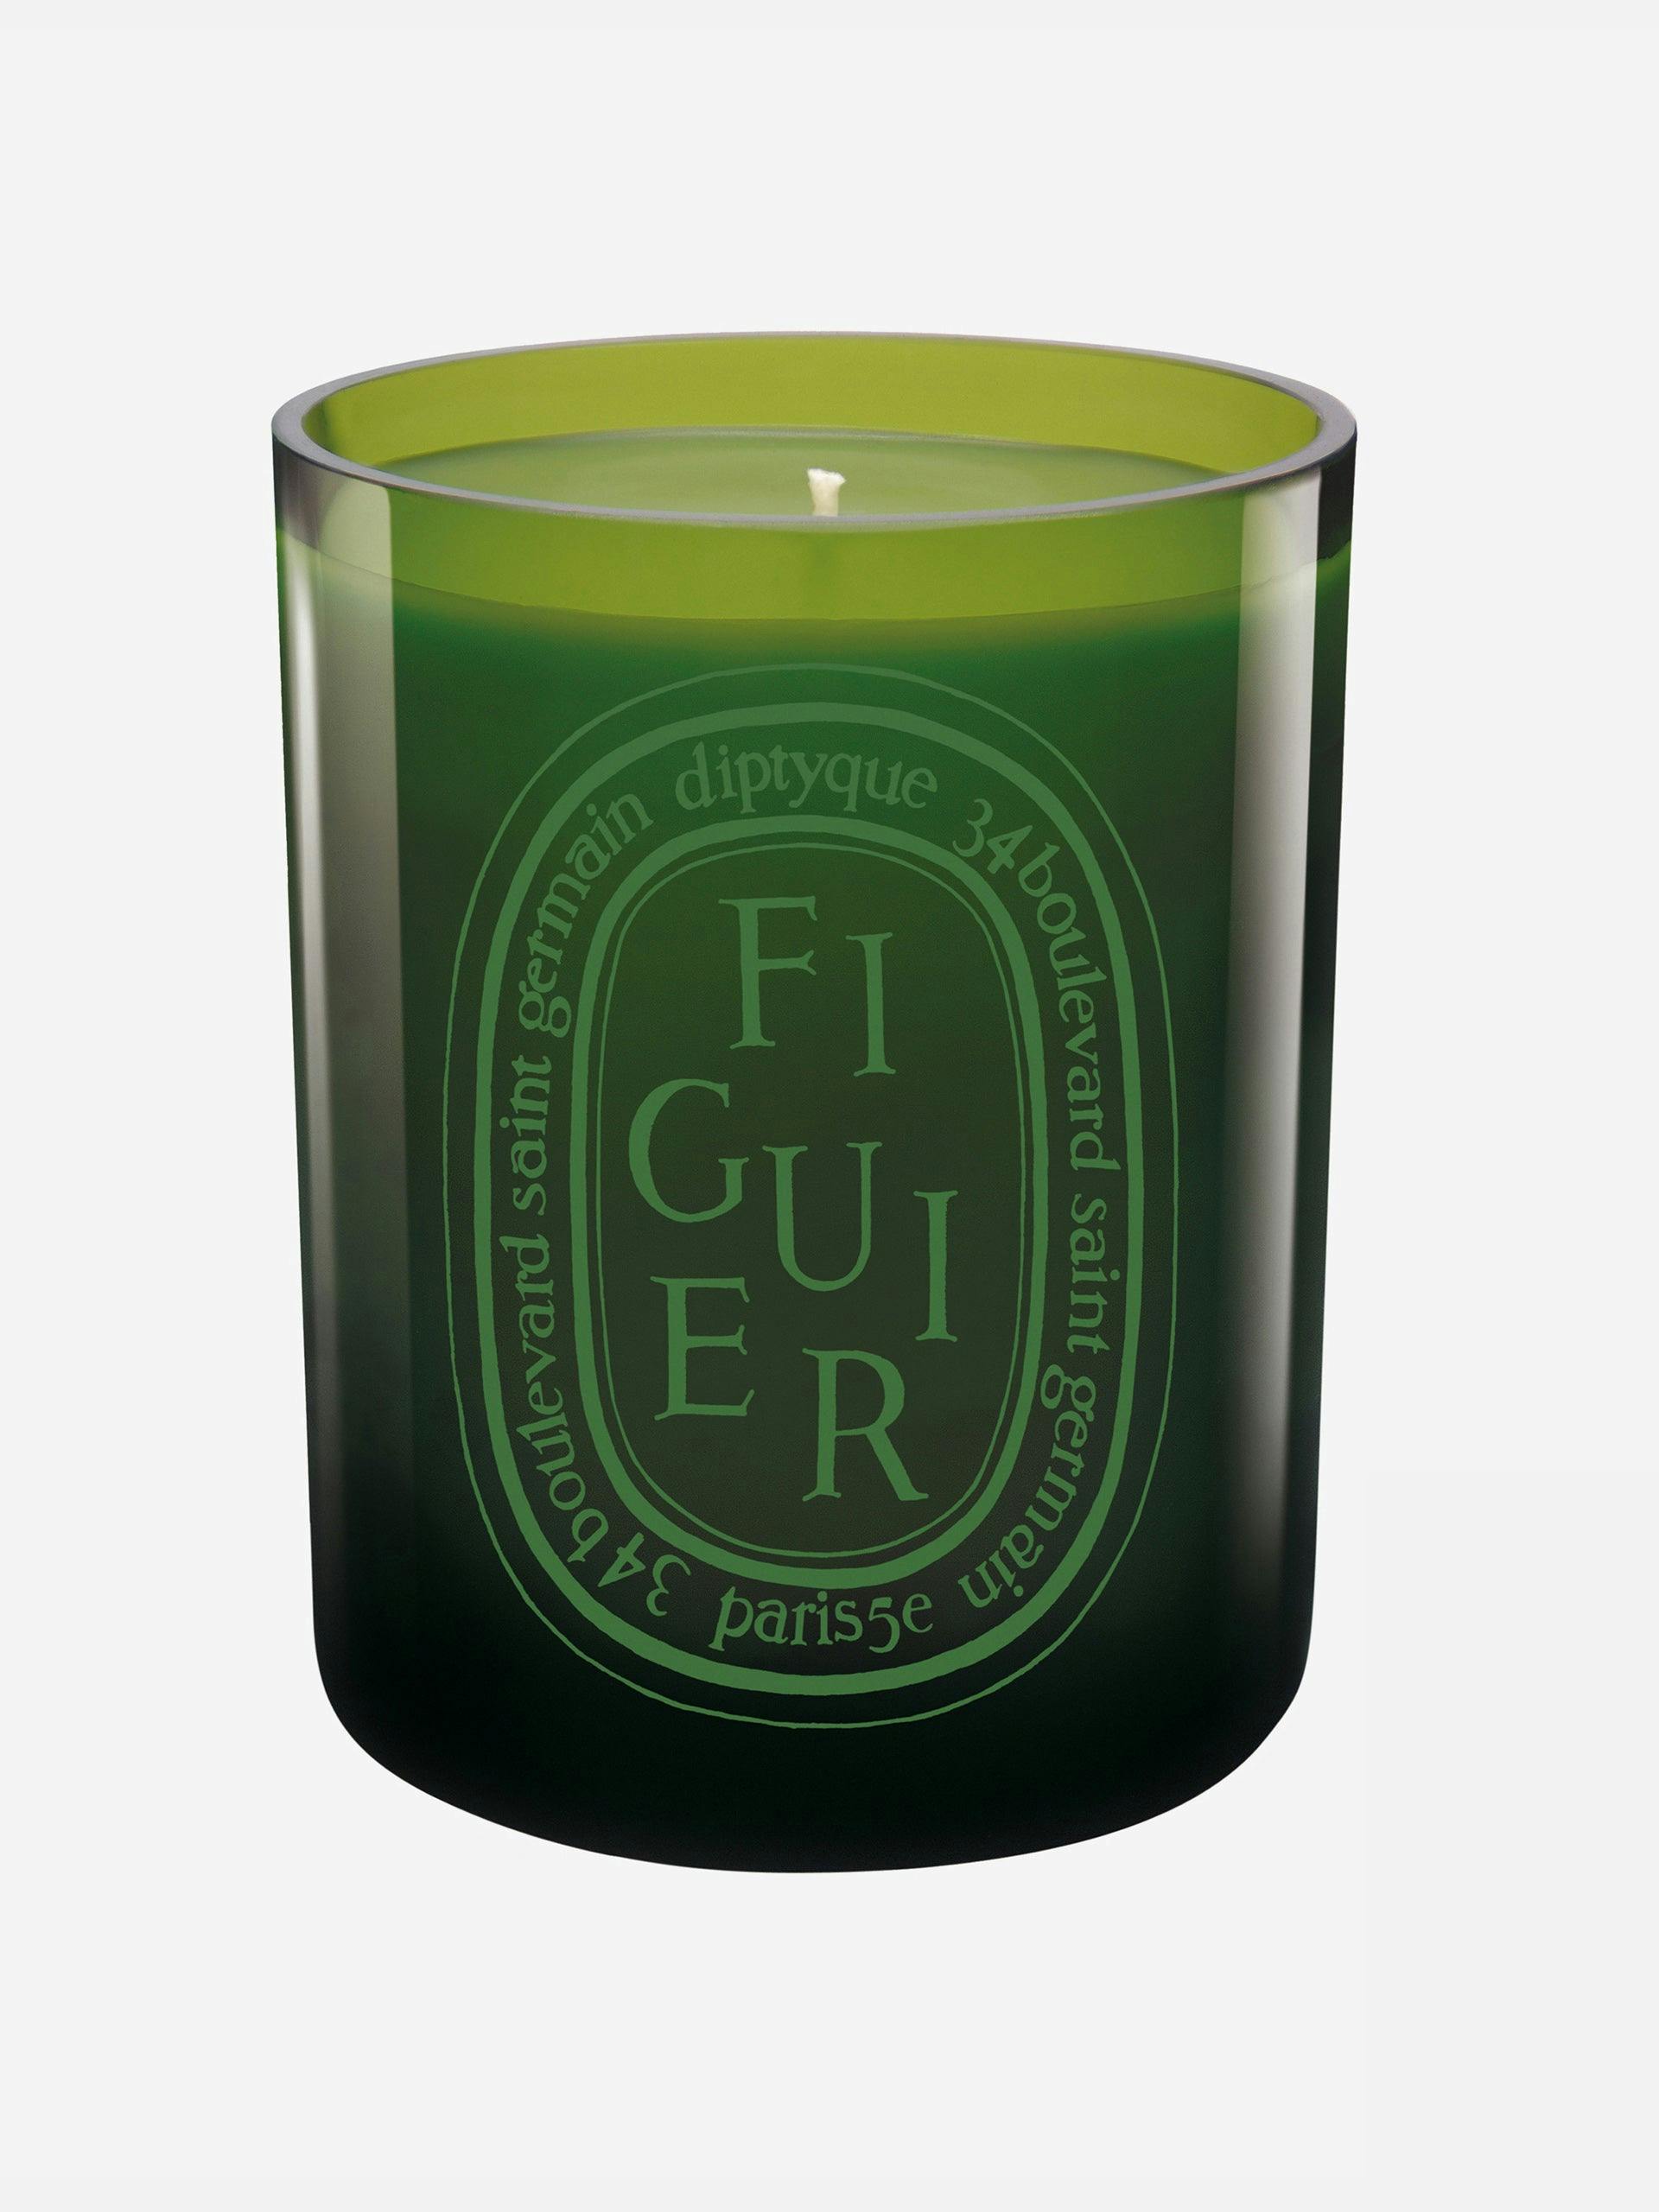 Figuier scented candle